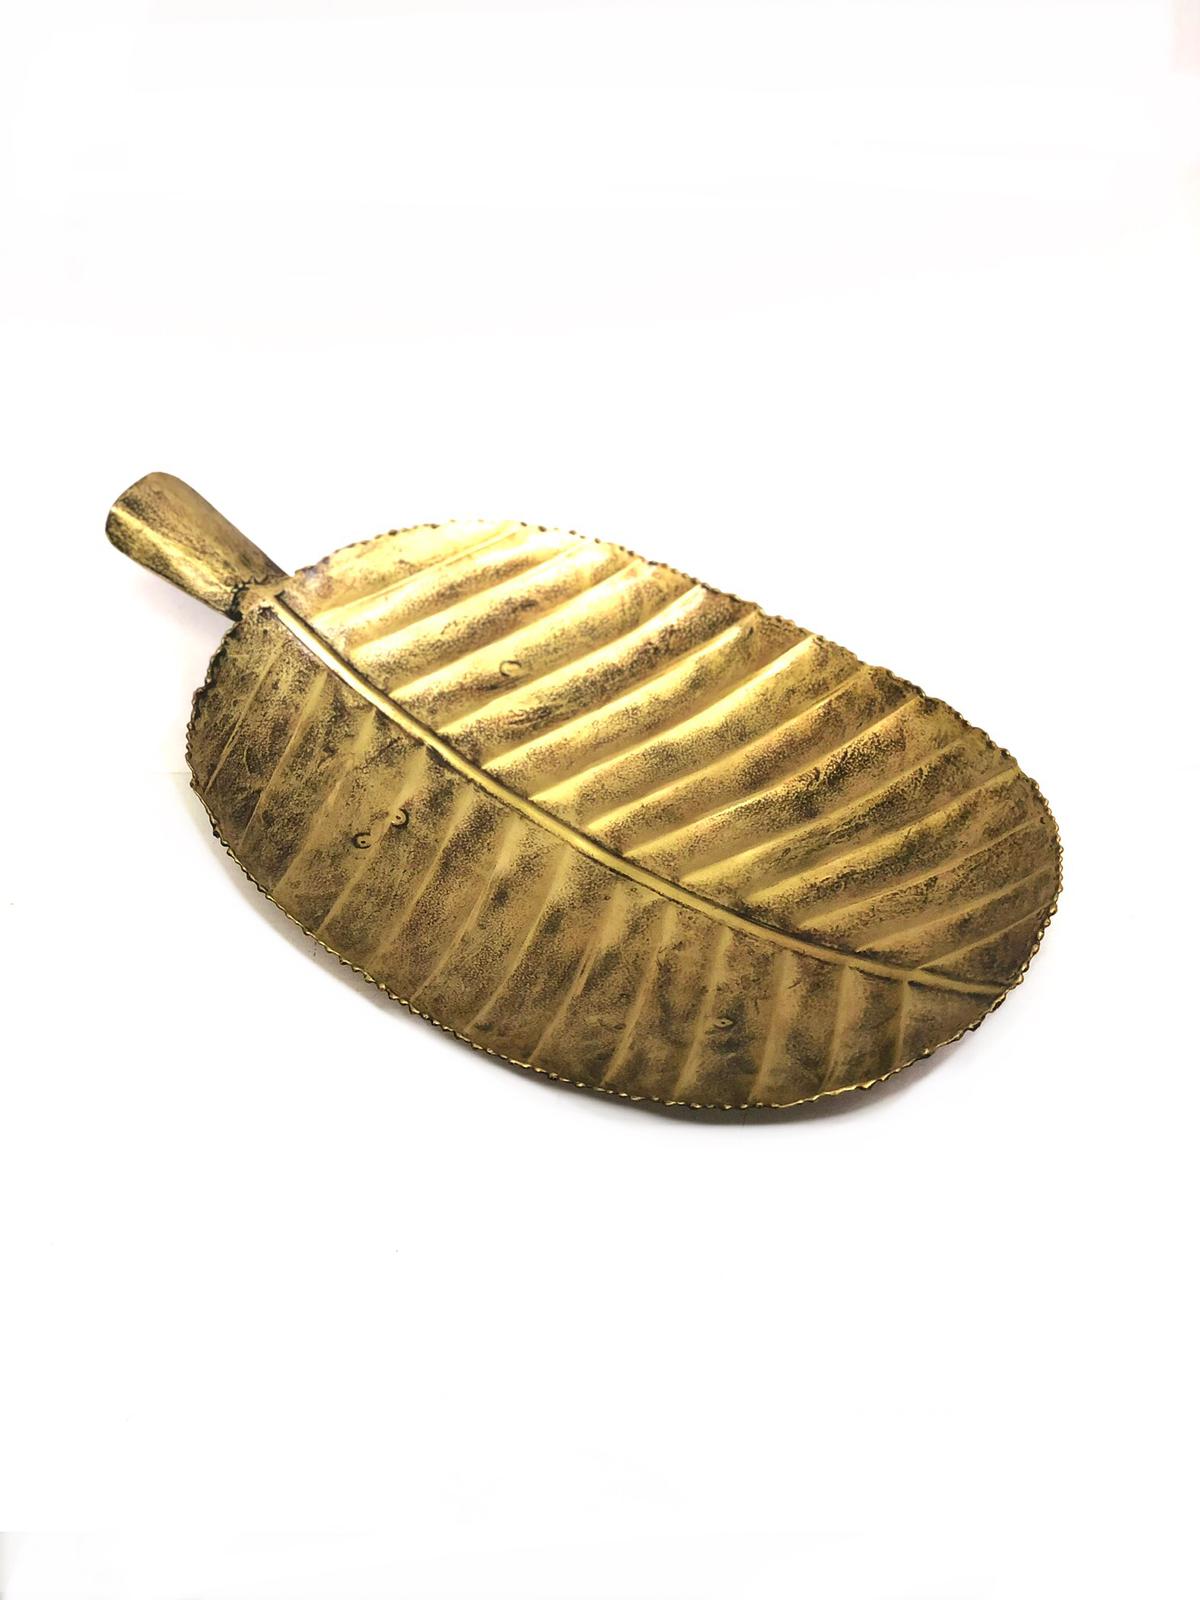 Oval Metal Leaf Design To Serve Snacks In Traditional Way New By Tamrapatra